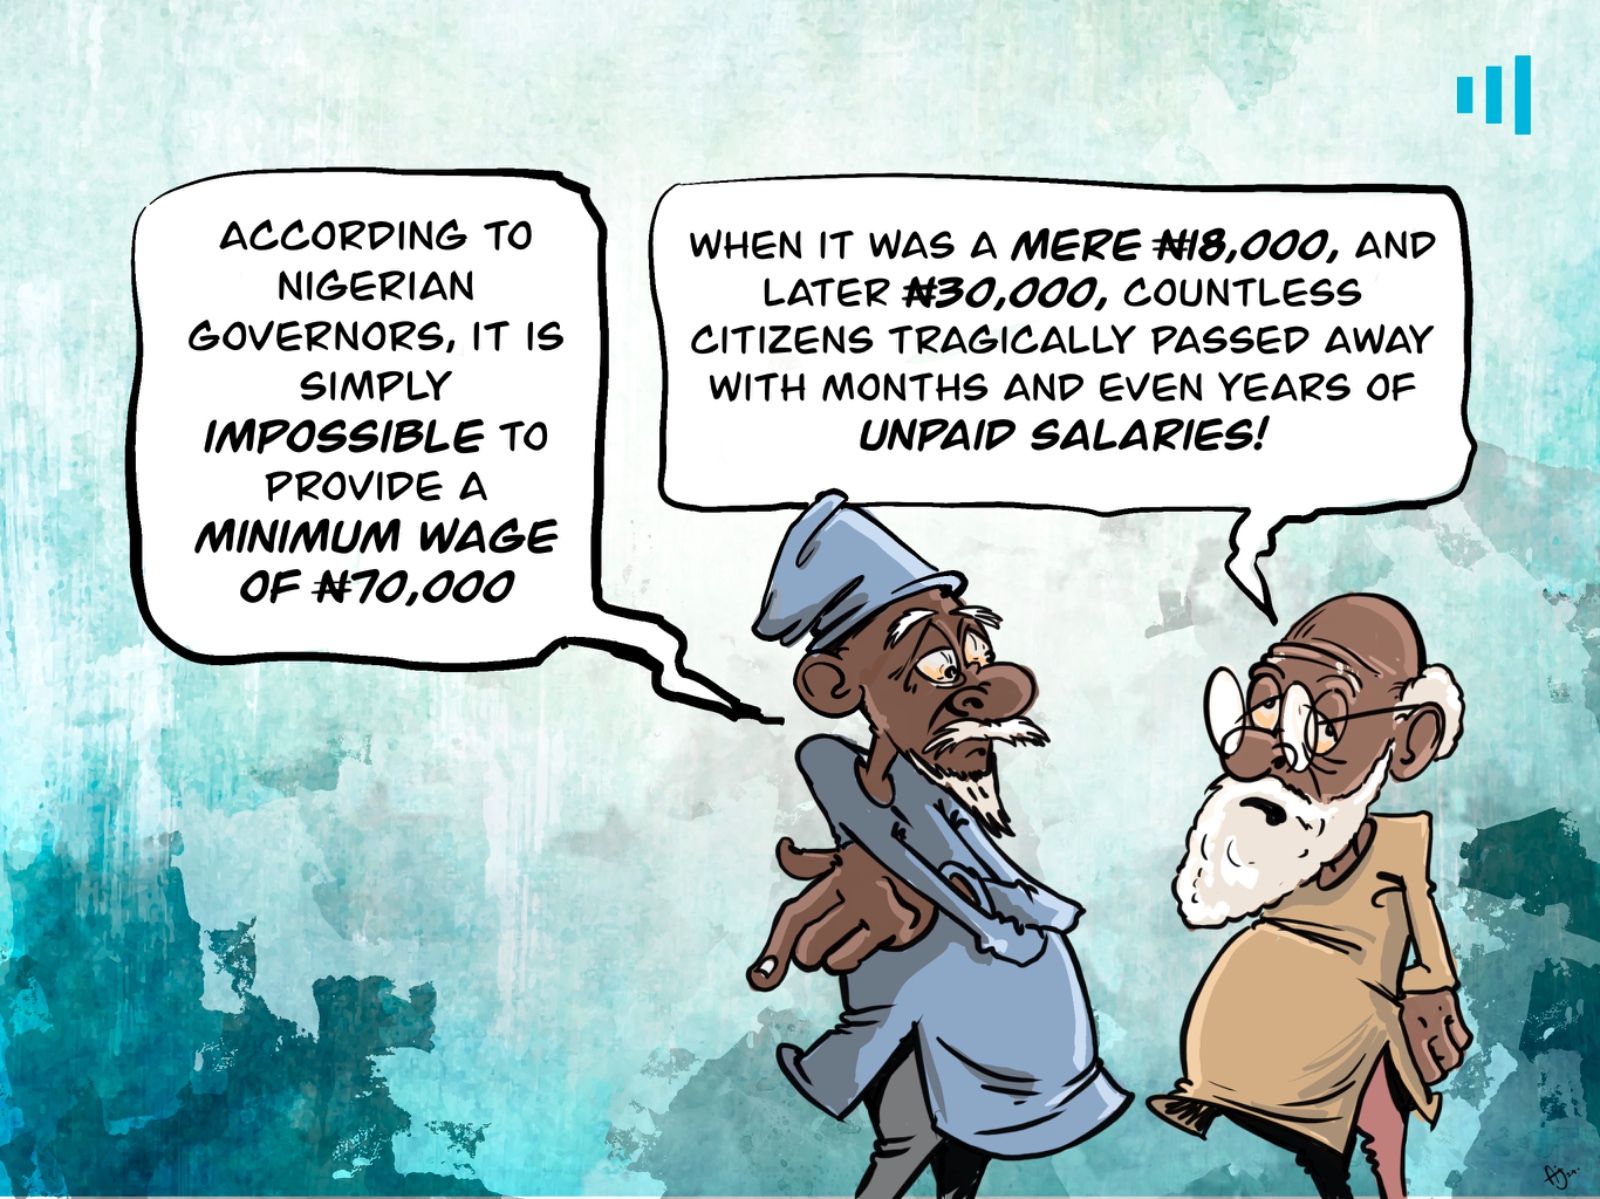 Cartoon of two men discussing the impracticality of a ₦70,000 minimum wage as per Nigerian governors, contrasting past lower wages and unpaid salaries.